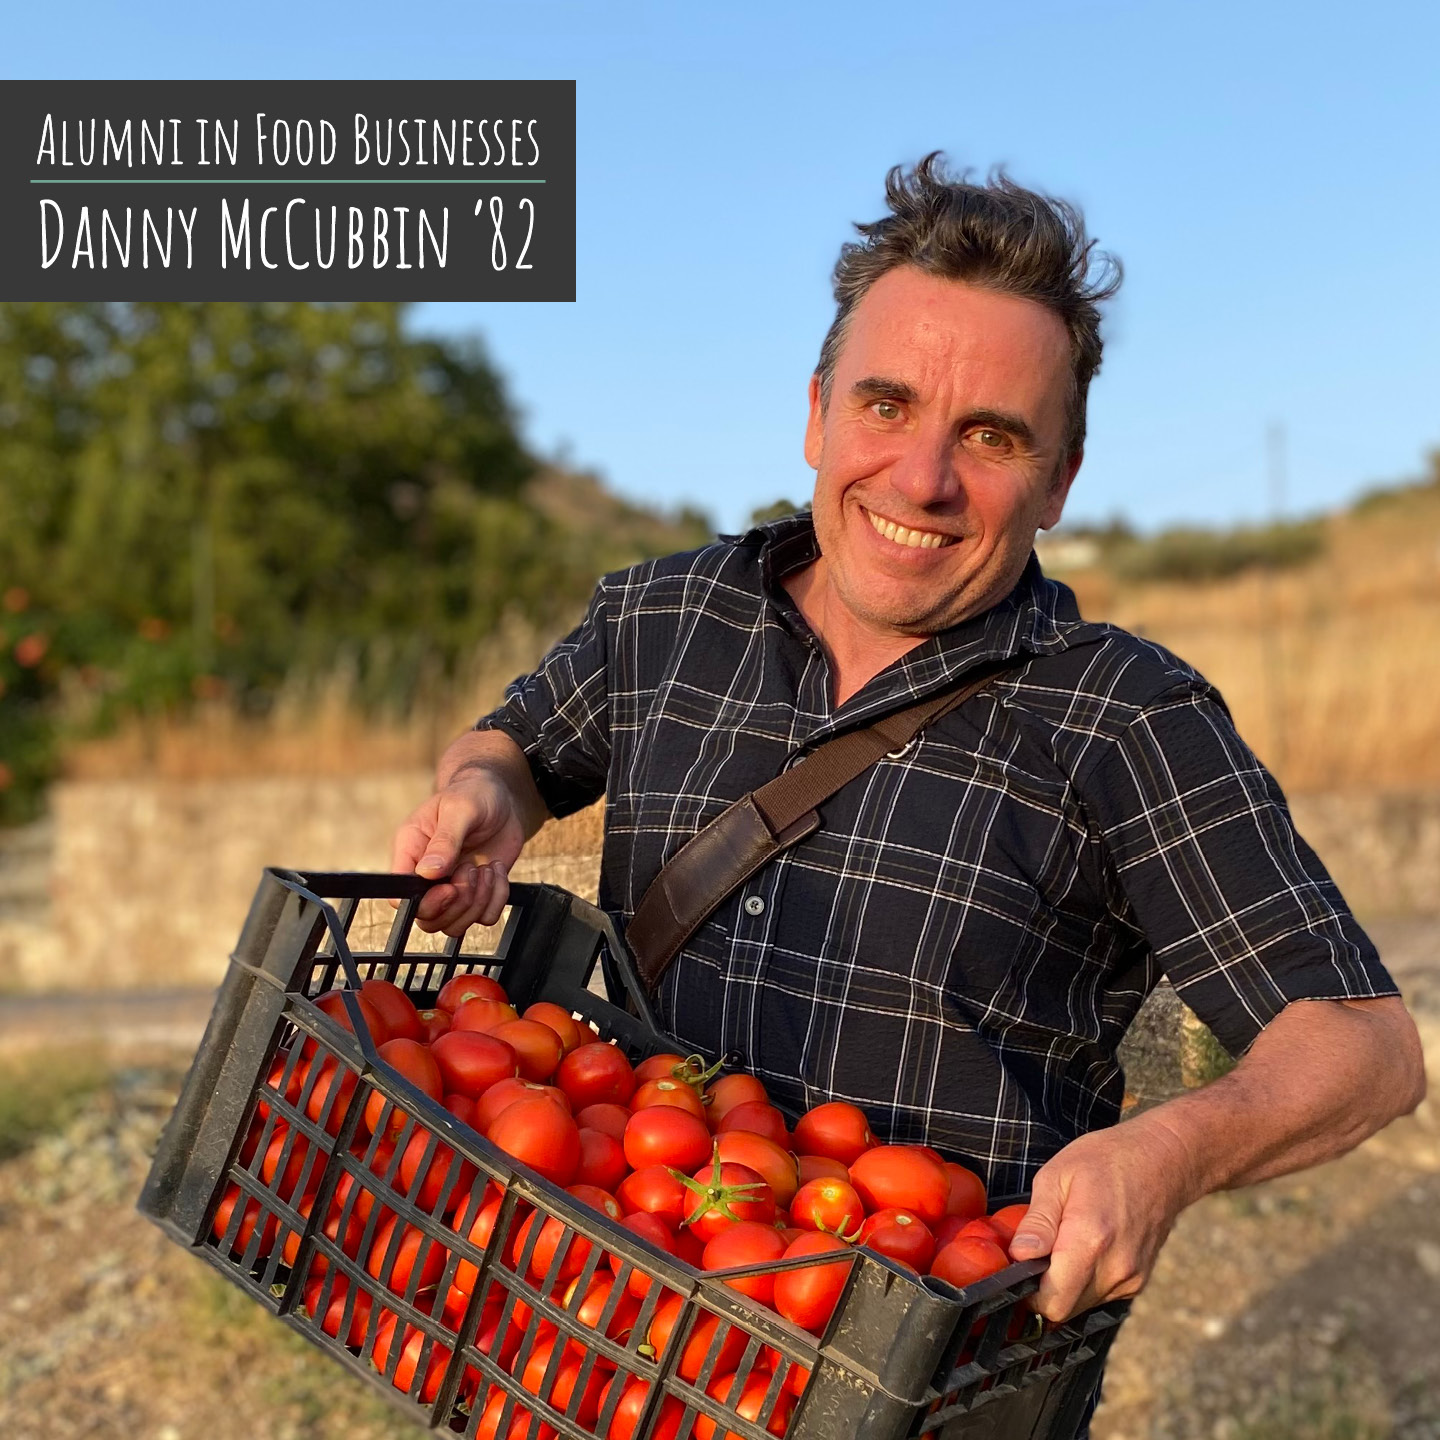 Danny McCubbin ’82 | A Force For Change (Alumni in Food Businesses)